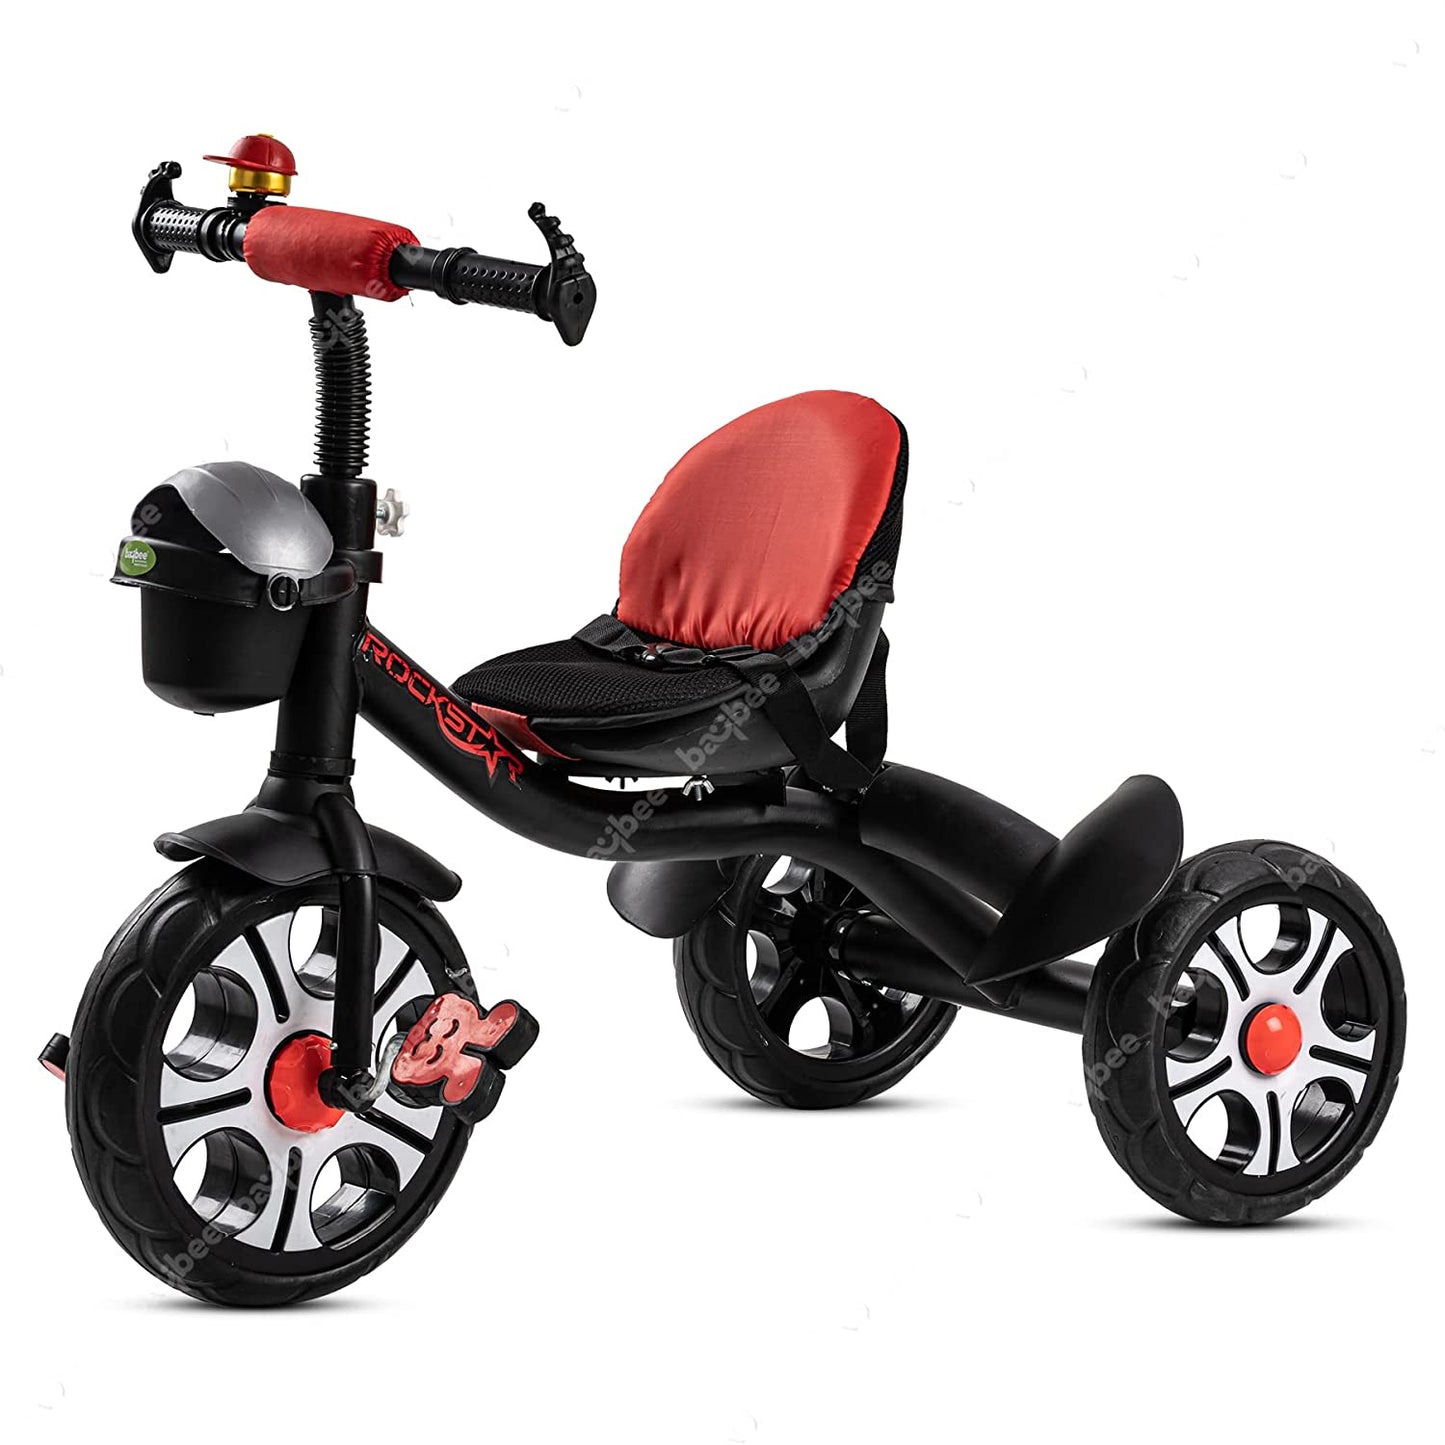 Baybee Rockstar Tricycle for Kids, Smart Plug n Play Kids Cycle Trikes with Basket, Cushion Seat & Safety Belt | Baby Children's Cycle | Baby Tricycle Cycle for Kids 2 to 5 Years Boys Girls